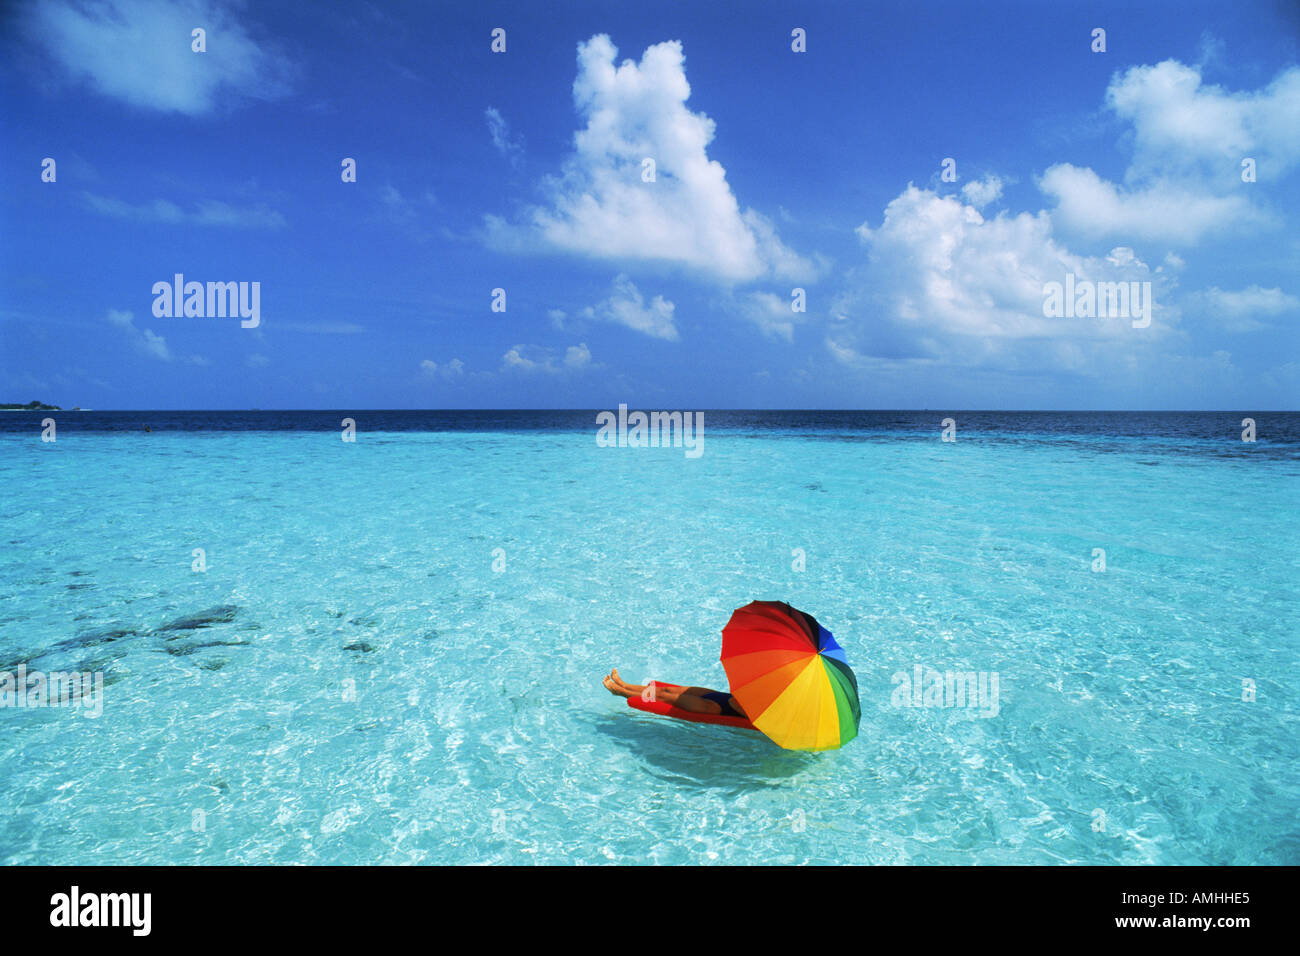 Spending dream holidays on air mattress under colorful parasol between blue skies and waters in aqua paradise Stock Photo